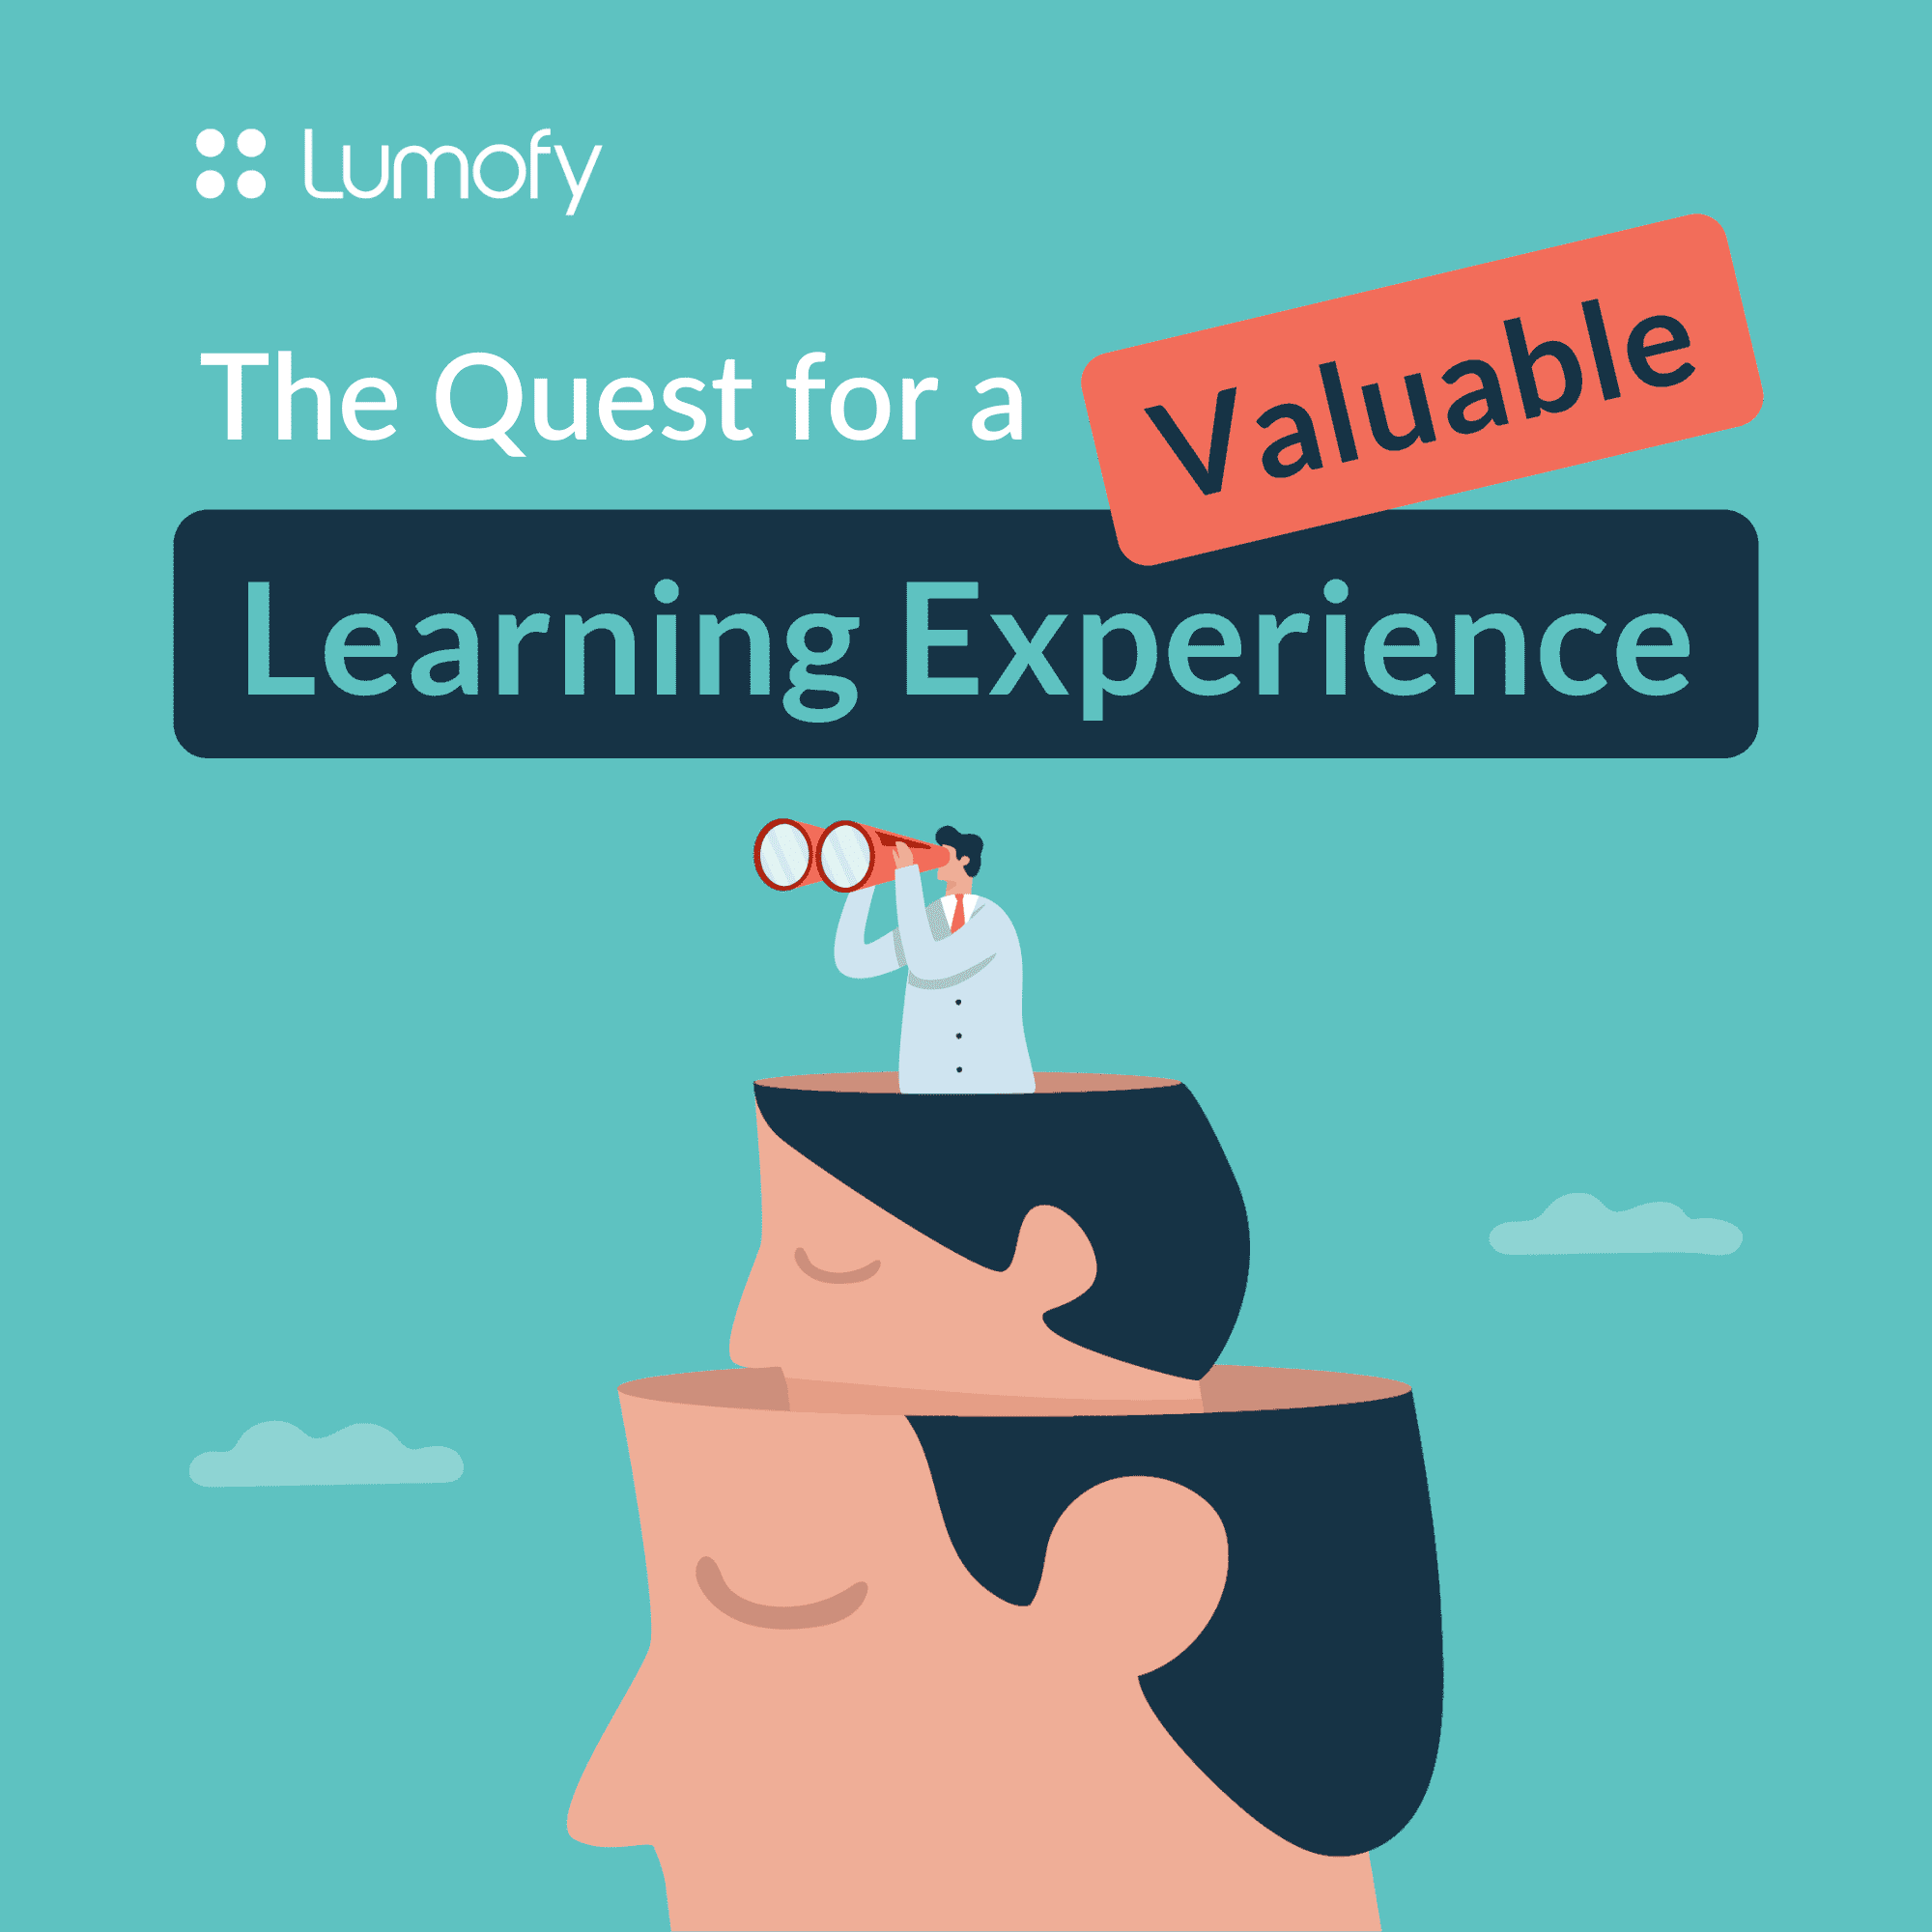 The Quest For a Valuable Learning Experience